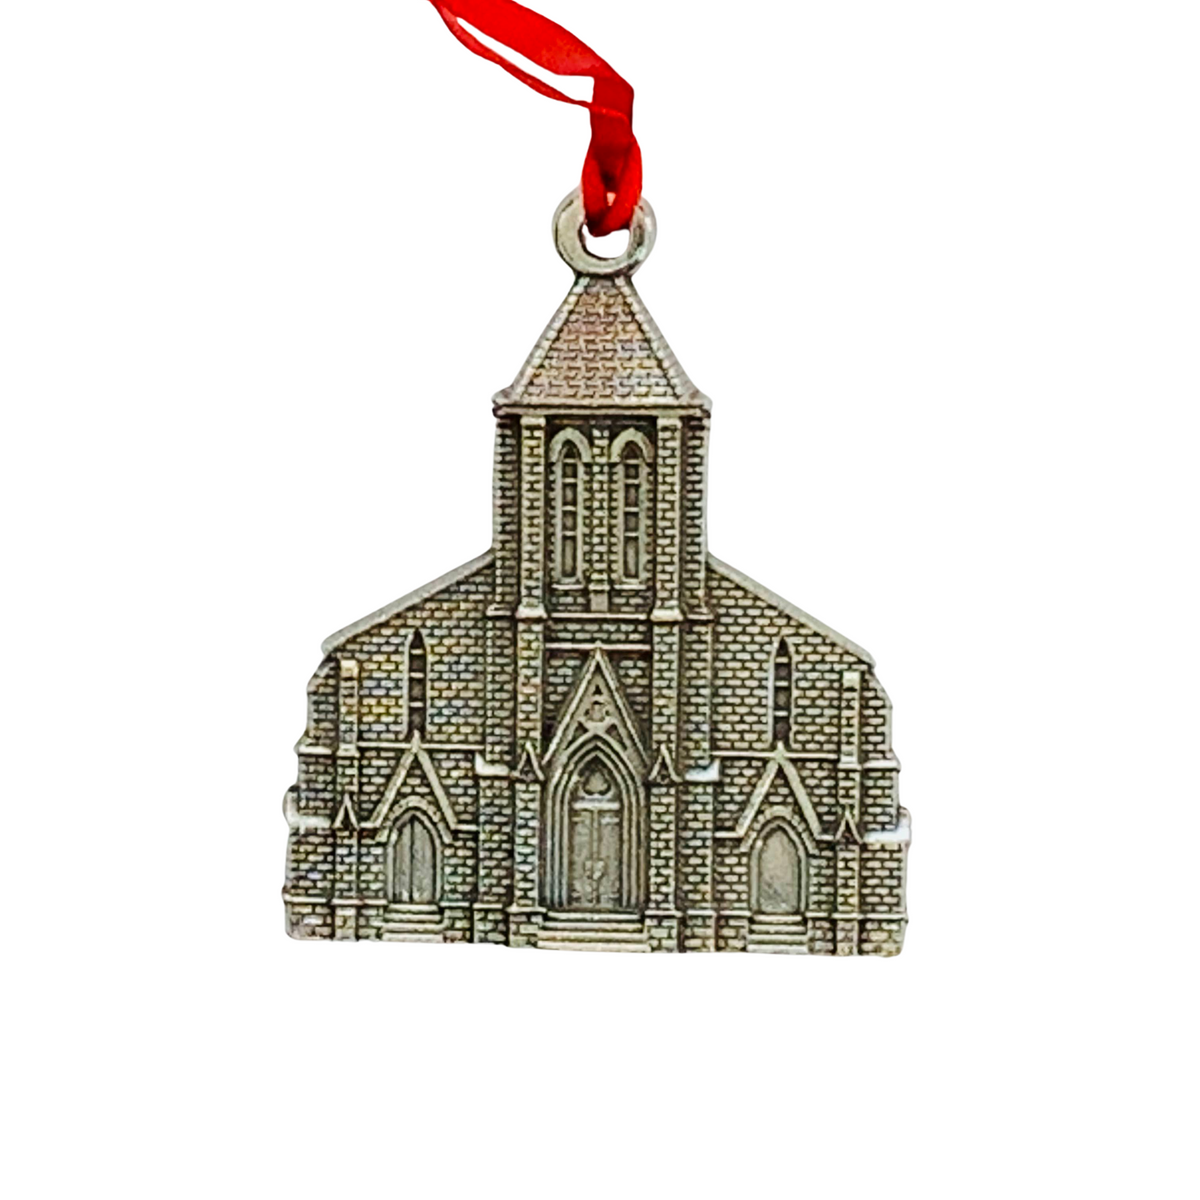 2004 Pewter - St. Paul's Anglican Church